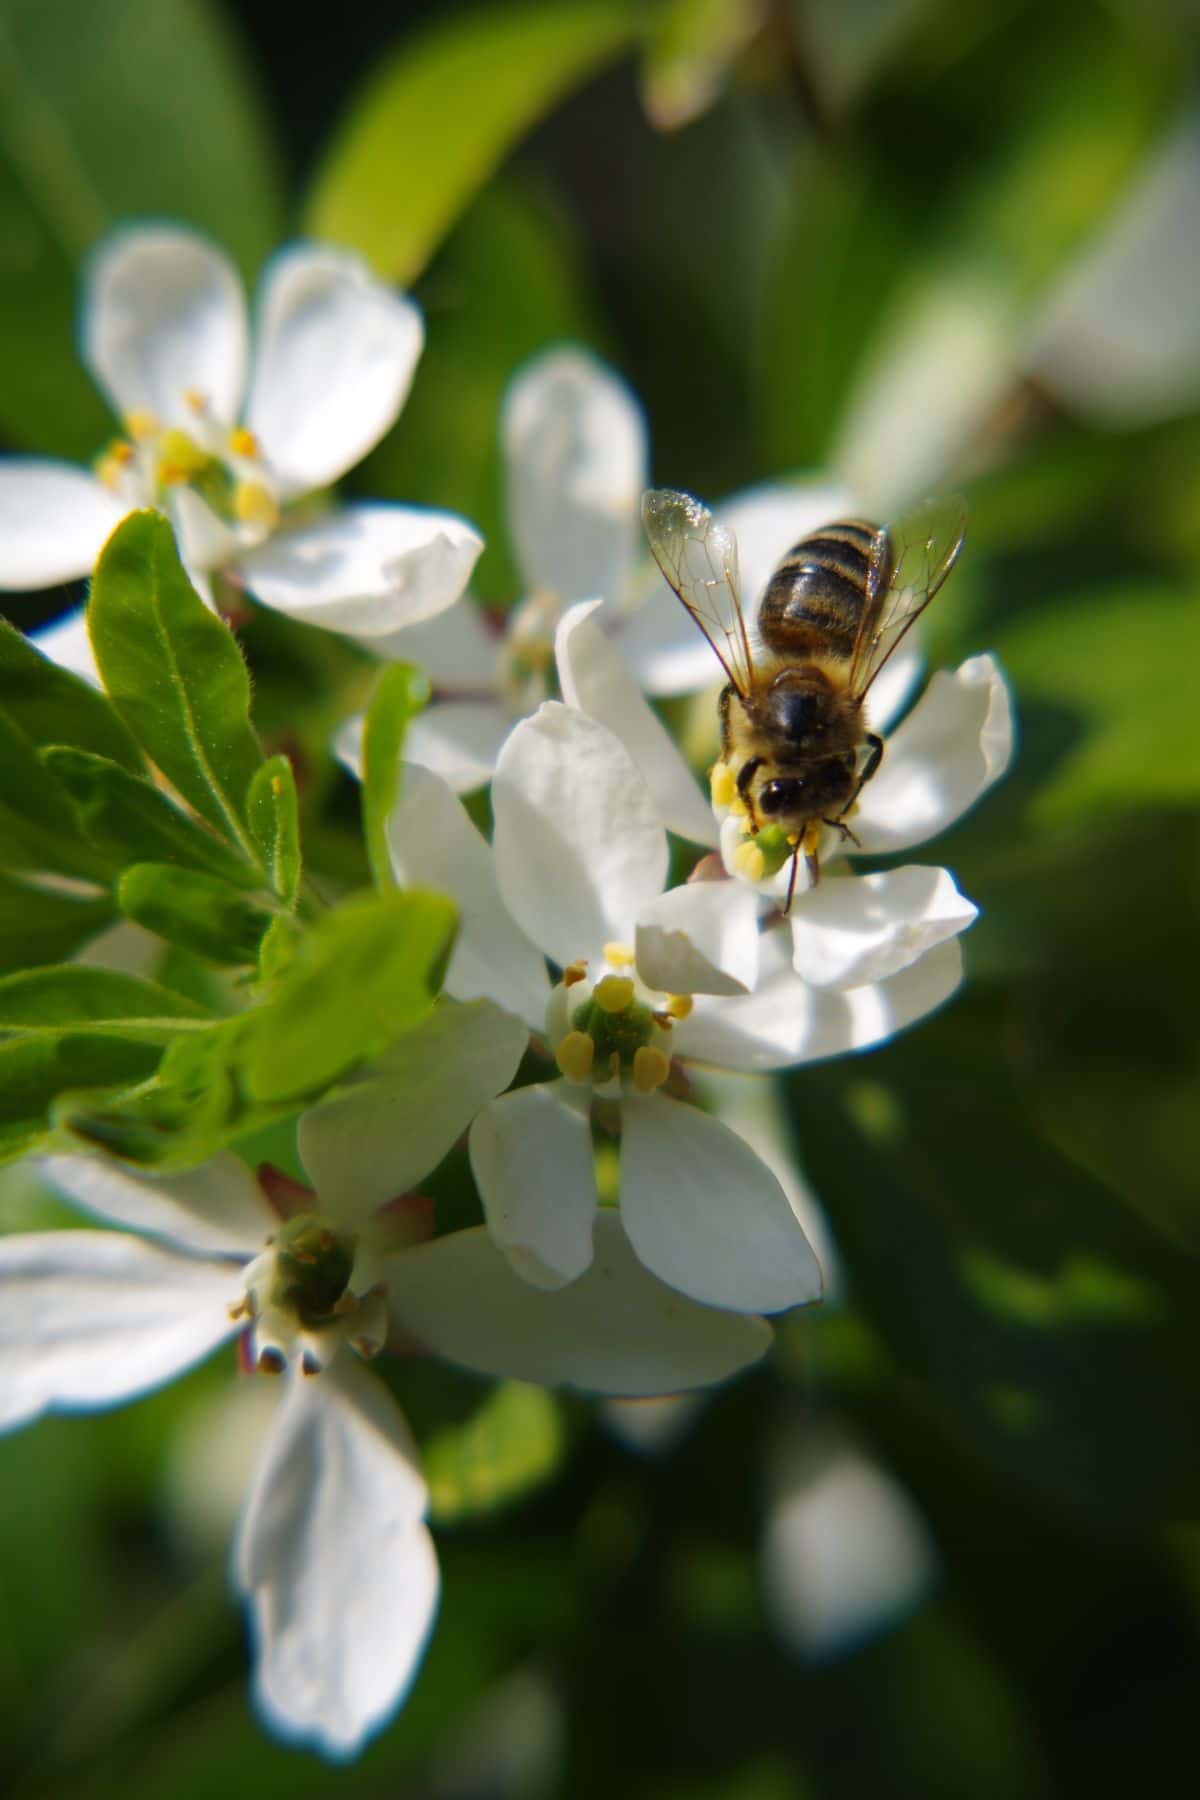 A honey bee collecting pollen on a fruit tree blossom